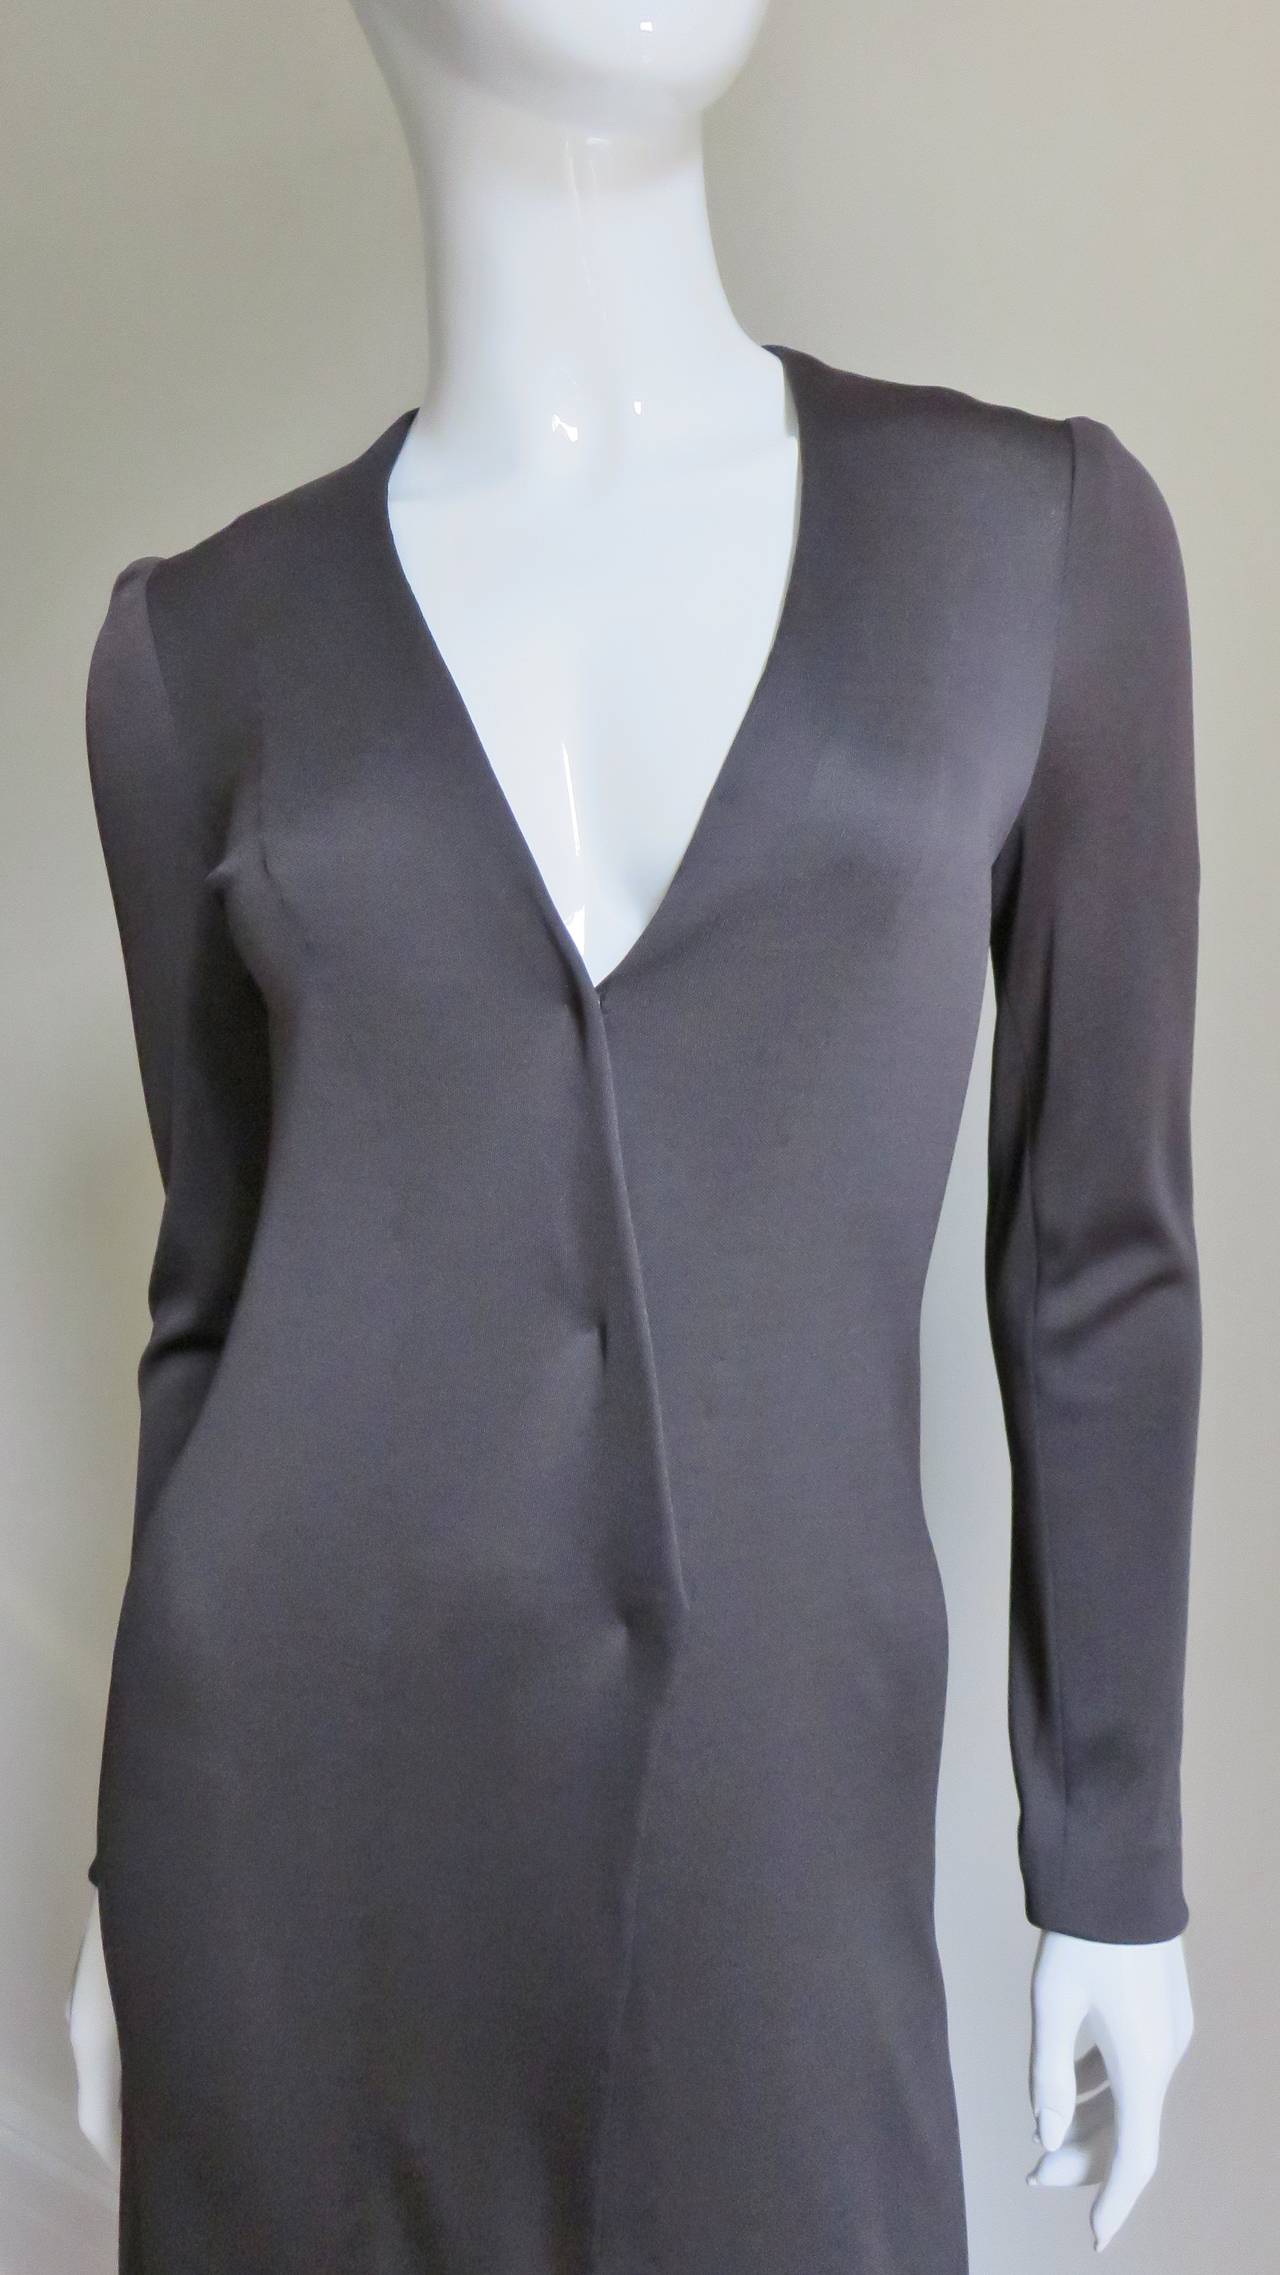 An excellent example of the classic elegance of Halston.  Made of charcoal grey jersey it is a long sleeve shirtwaist style maxi dress with a matching tie belt.  It  has an adjustable plunging neckline and closes with snaps down the front of the